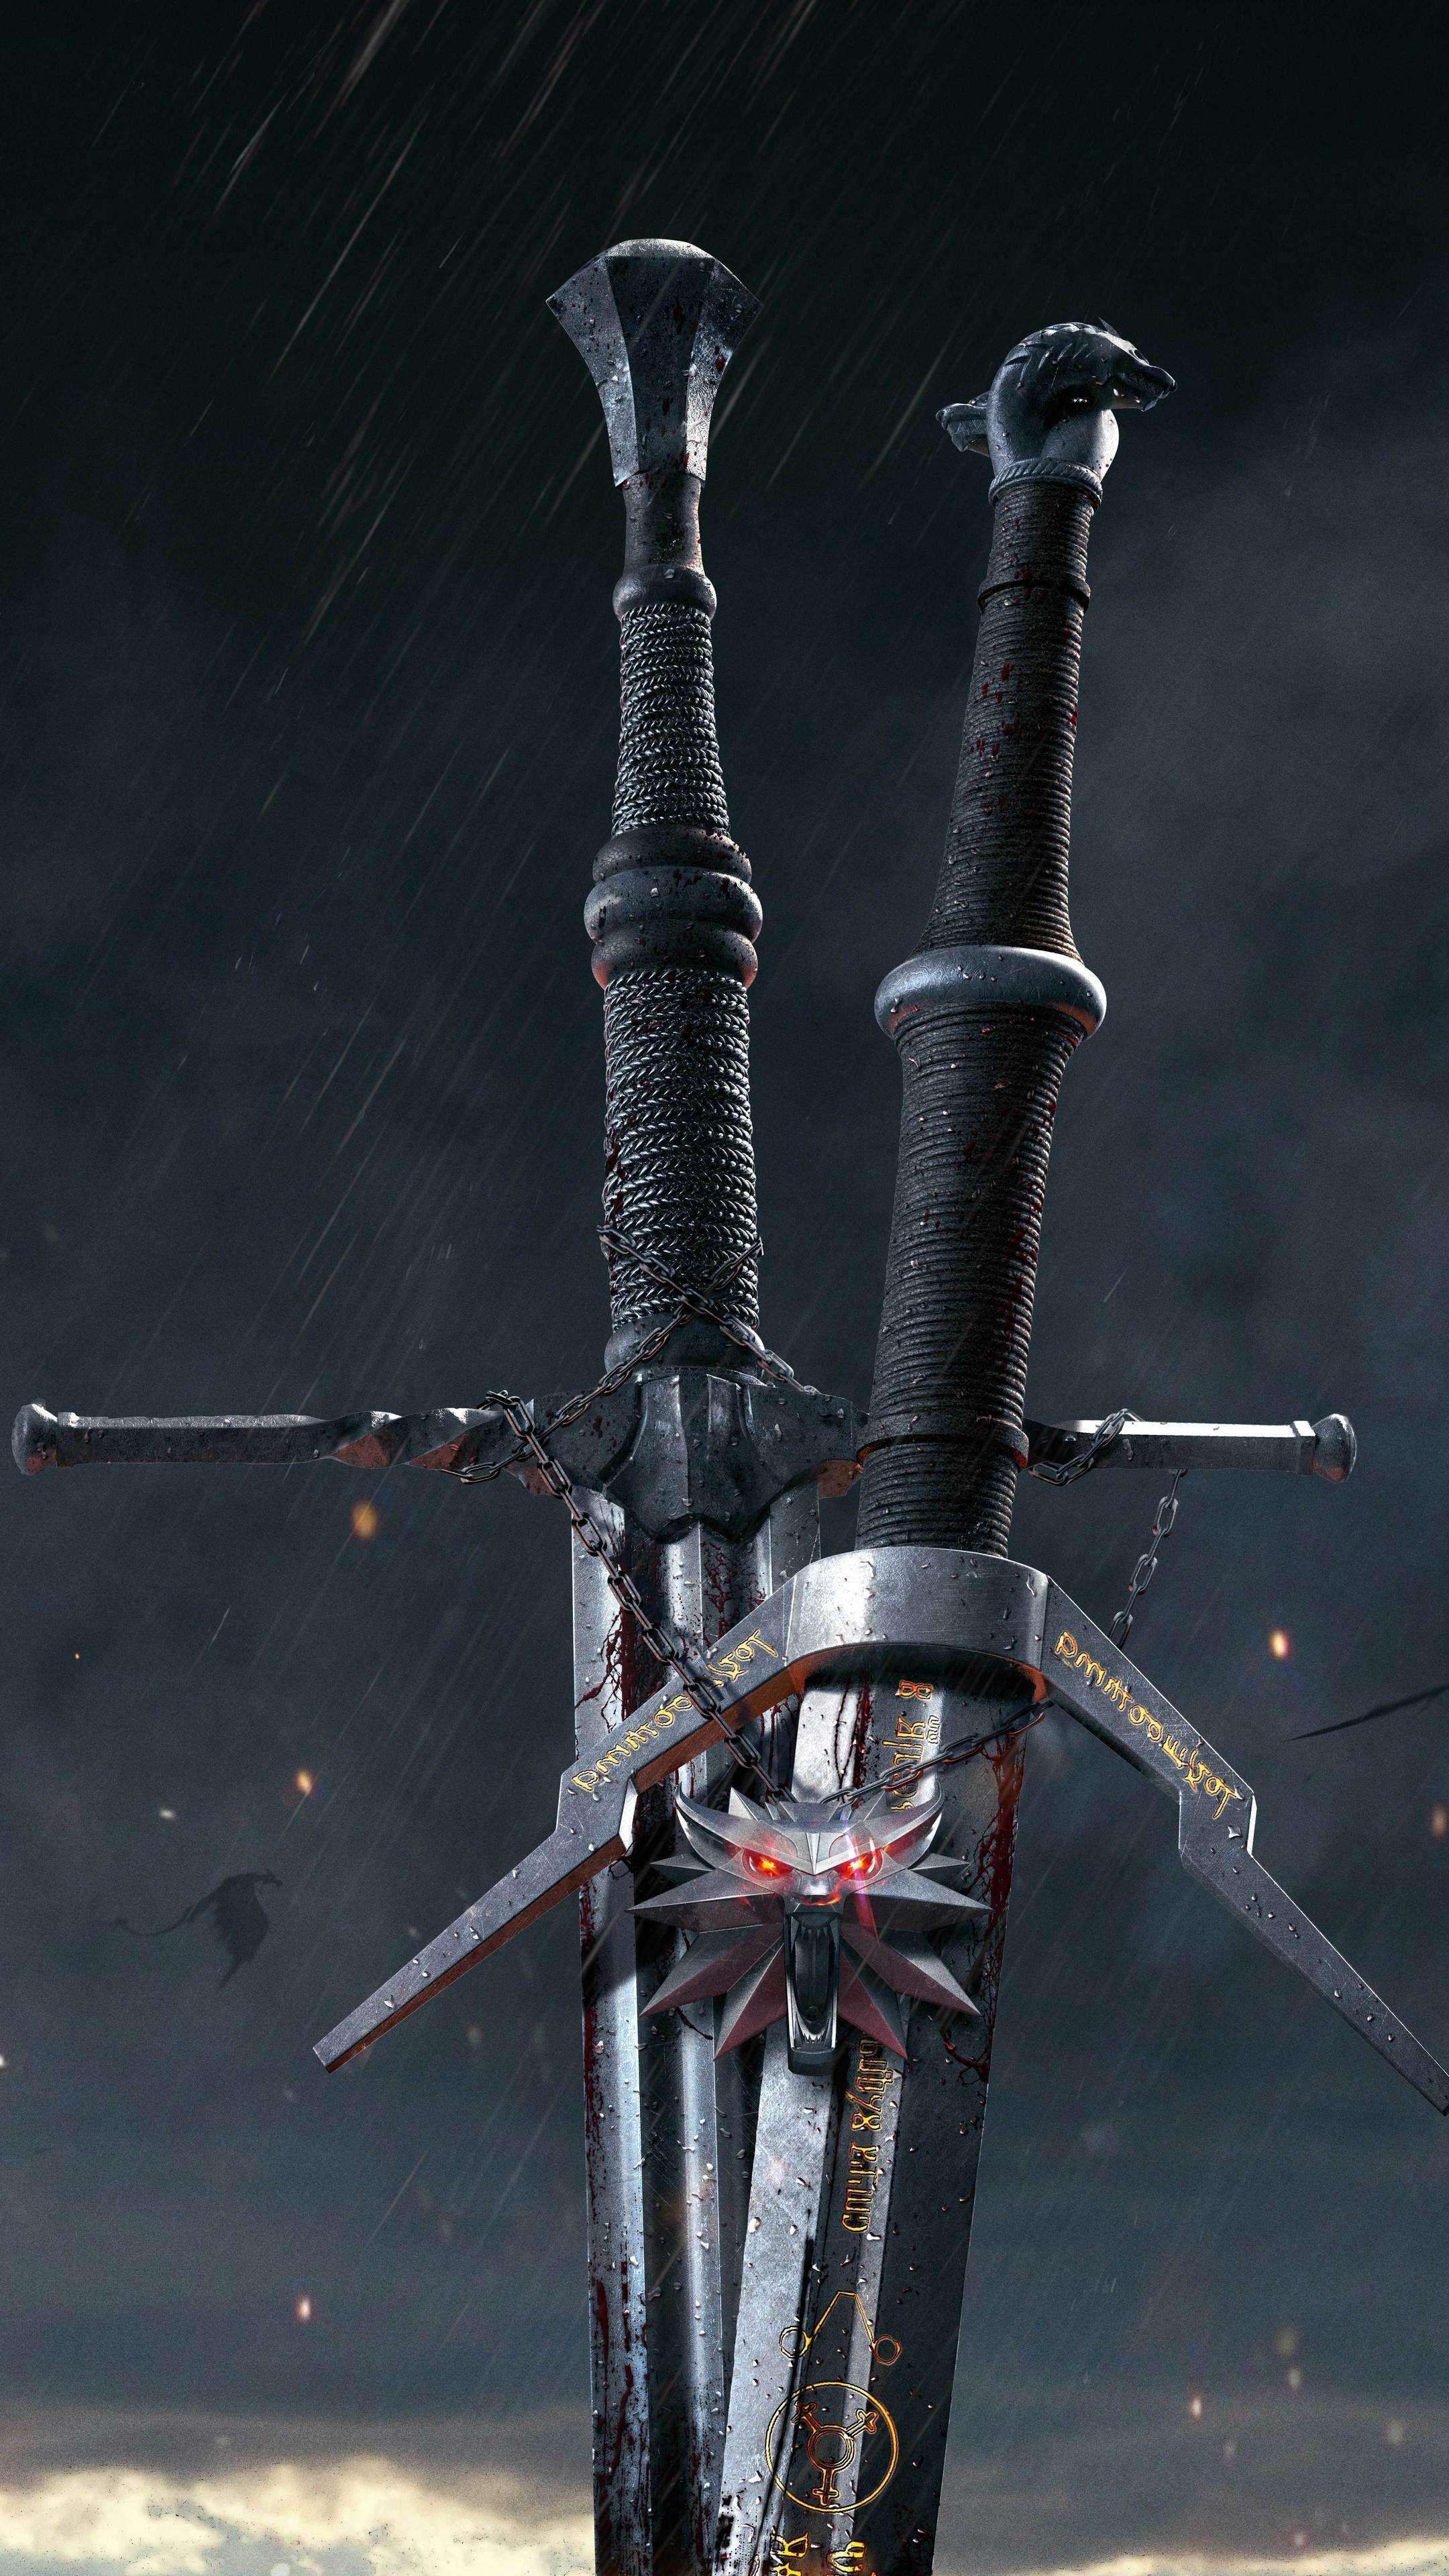 The witcher 3. iPhone Wallpaper. Witcher, Tatuagem witcher